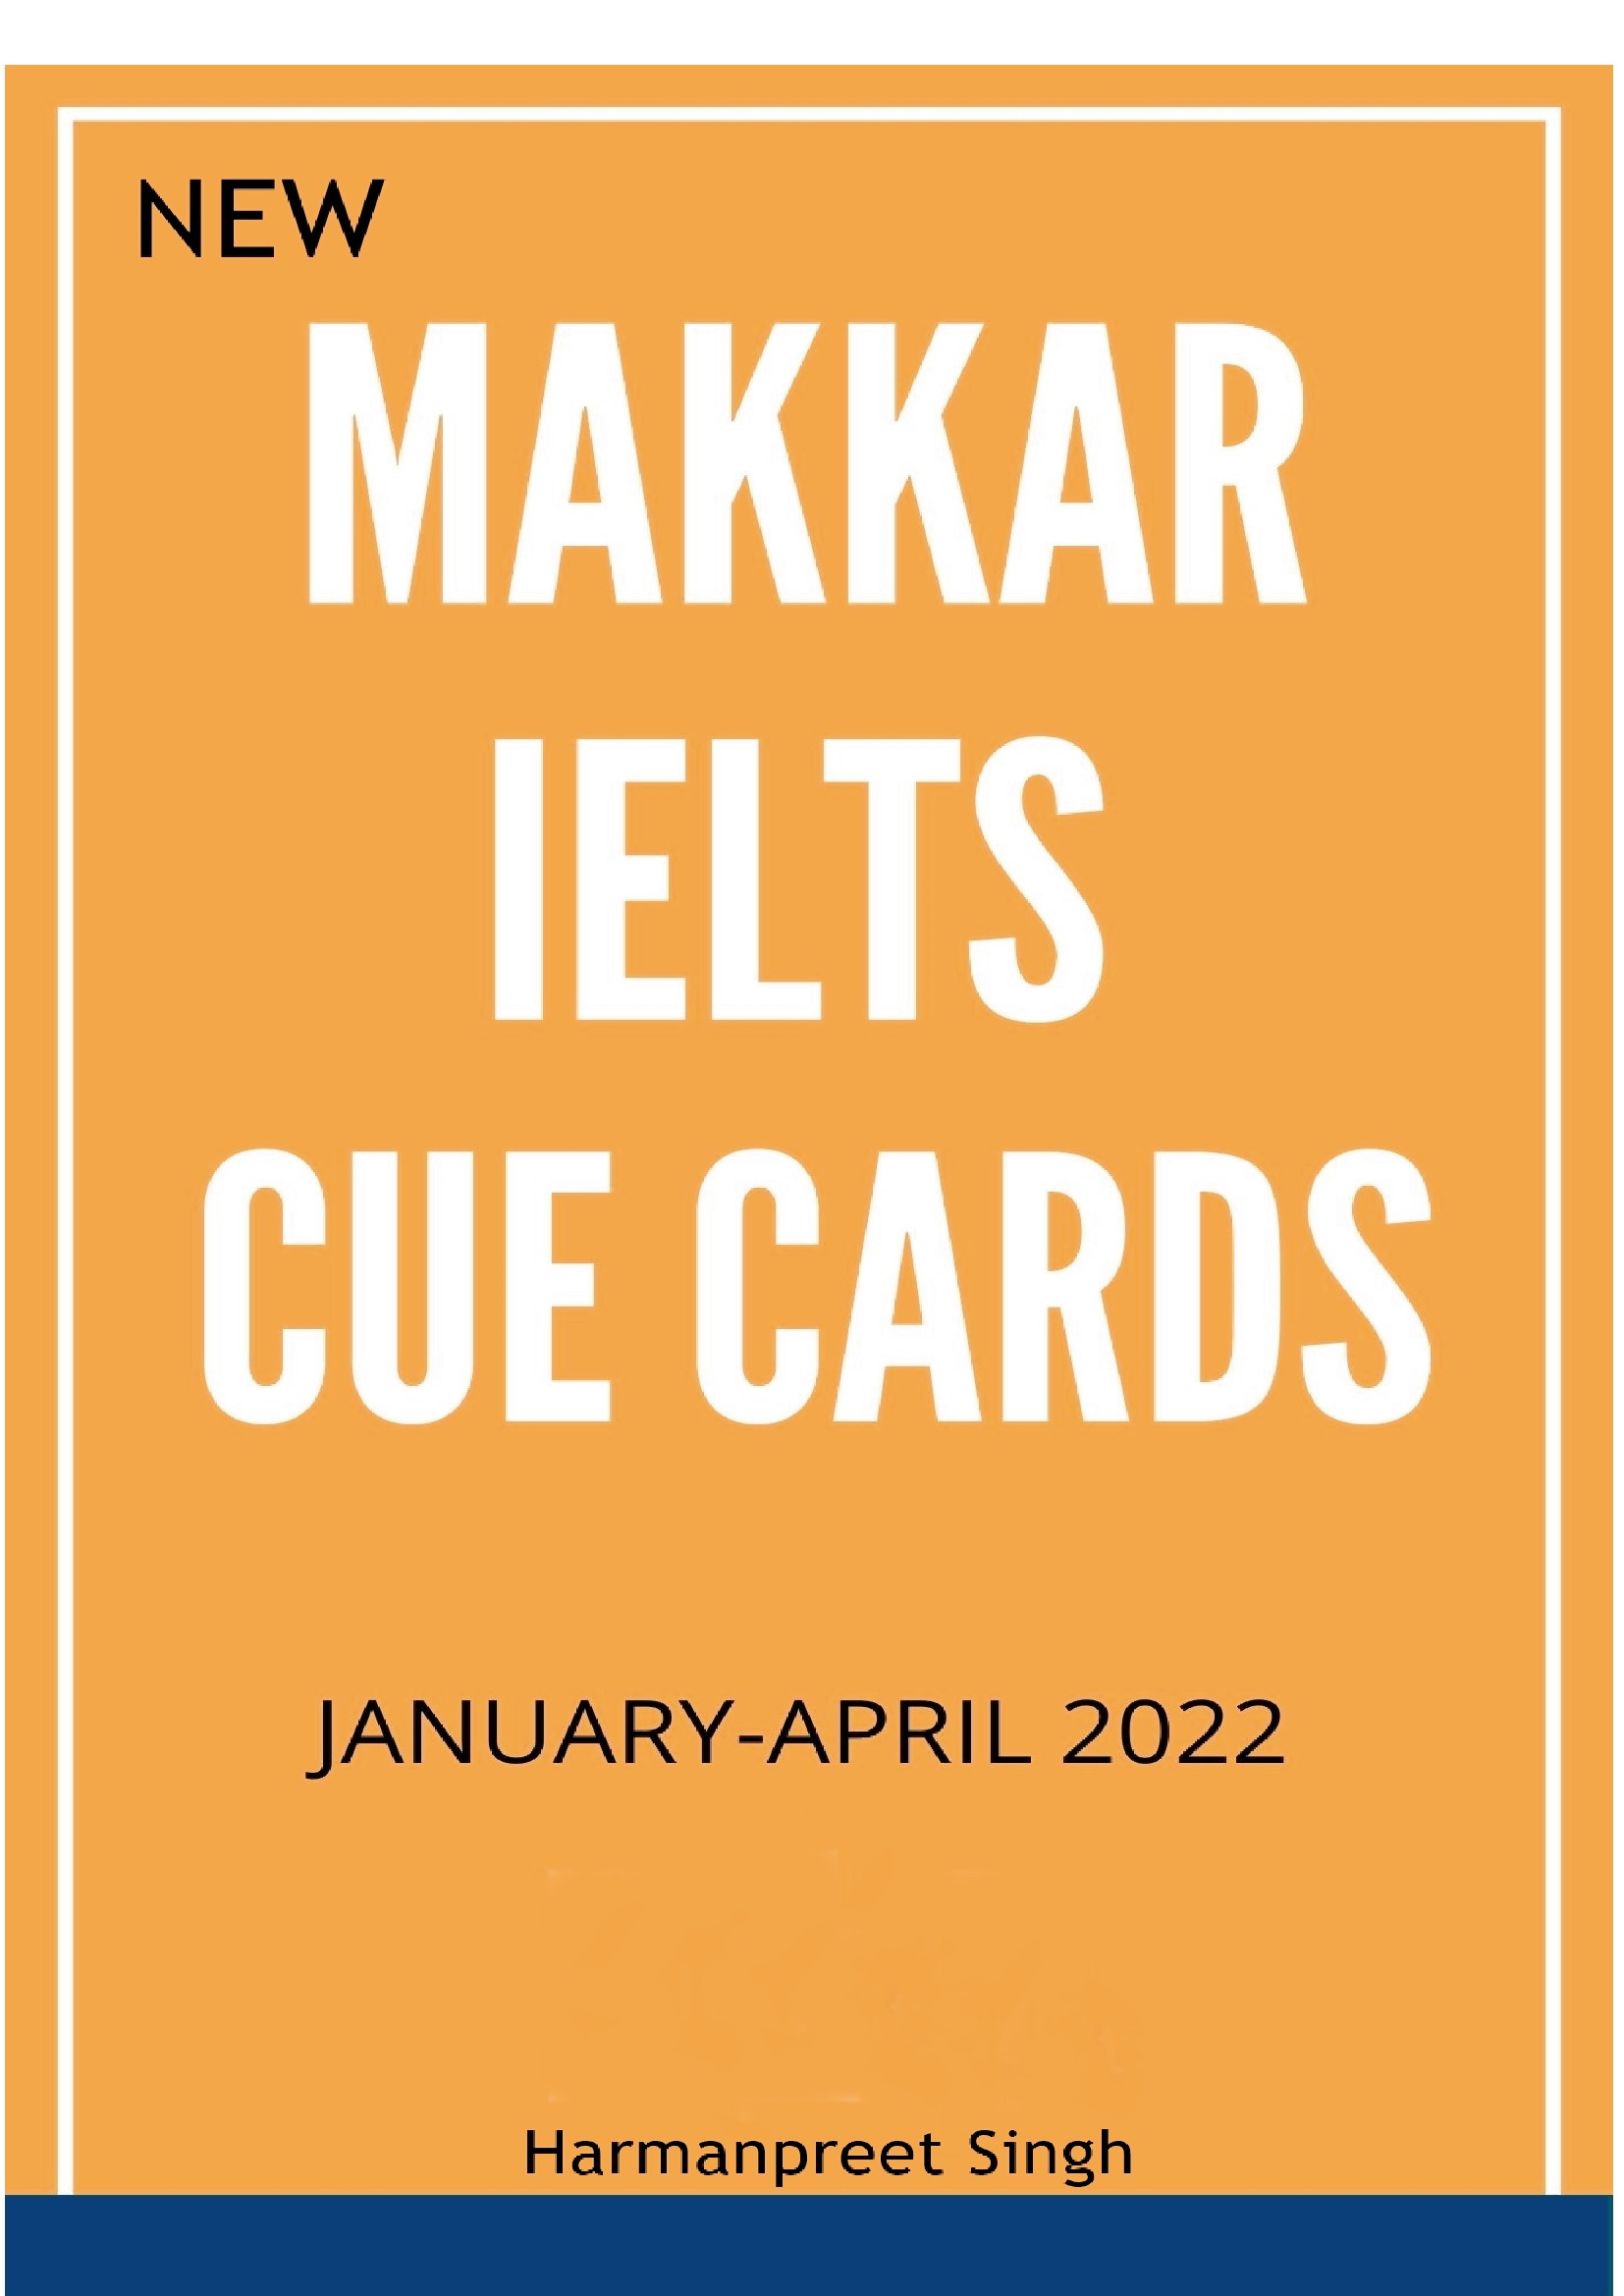 New Makkar Ielts Cue Cards For January To April 2022 5590